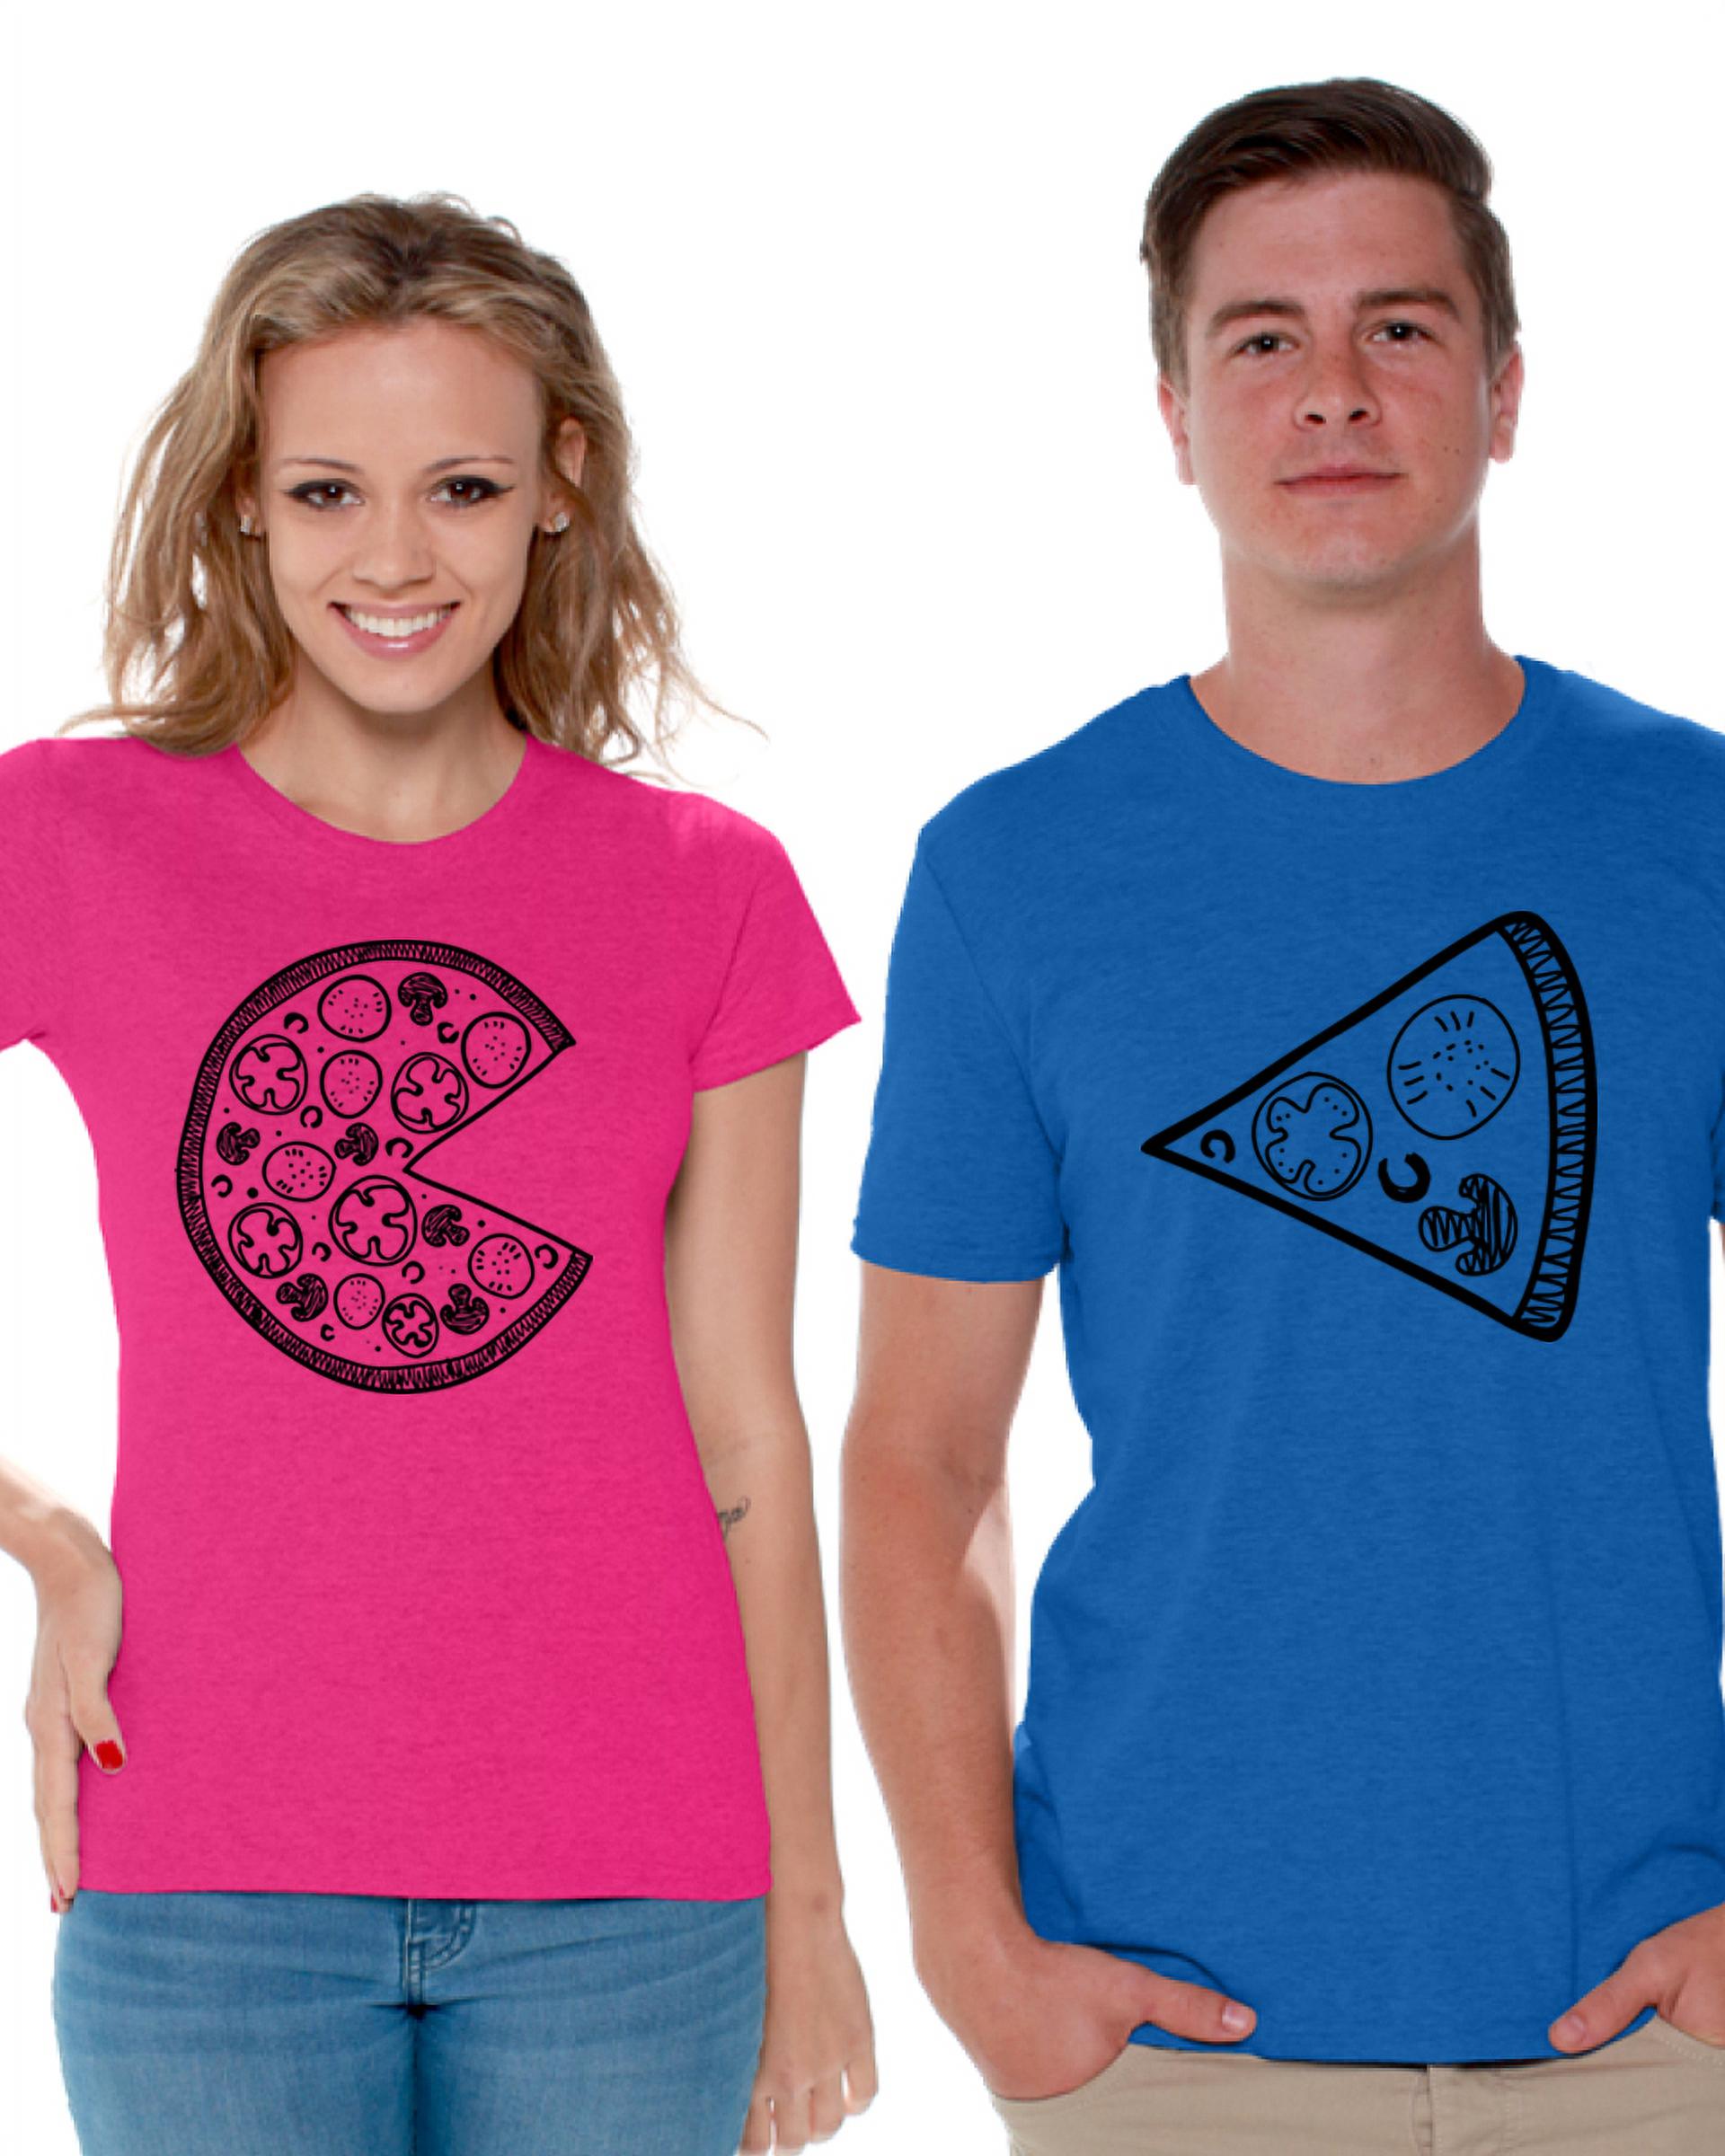 Awkward Styles Pizza Couple Shirts Funny Matching Pizza Shirts for Couples Pizza Slice T Shirt for Couples Valentine's Day Couple Outfits Cute Gift for Pizza Lovers Pizza Couples Matching Shirts - image 1 of 5